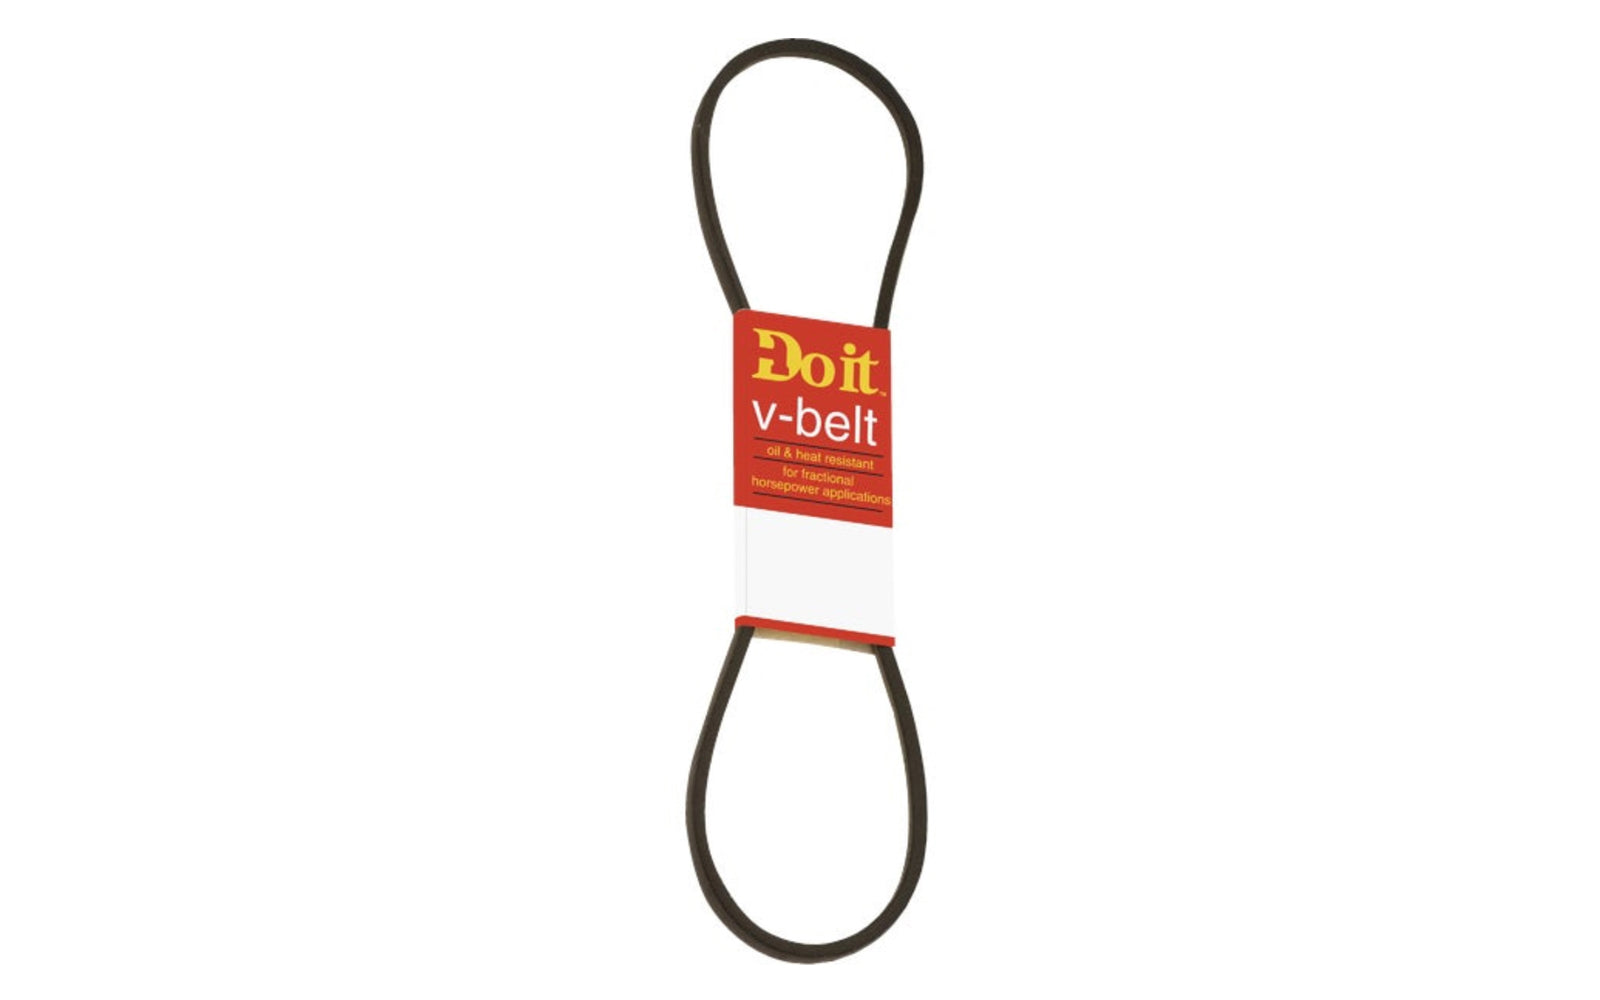 45" (1143 mm) Long x 1/2" (13 mm) Width Rubber V-Belt - 4L450. Oil & heat resistant. Recommended for 1-3 HP (horsepower) light-duty applications. Typically the best option for electric powered applications. For refrigerators, washing machines, pumps, stokers, woodworking machines. Pulley type: A-Pulley.